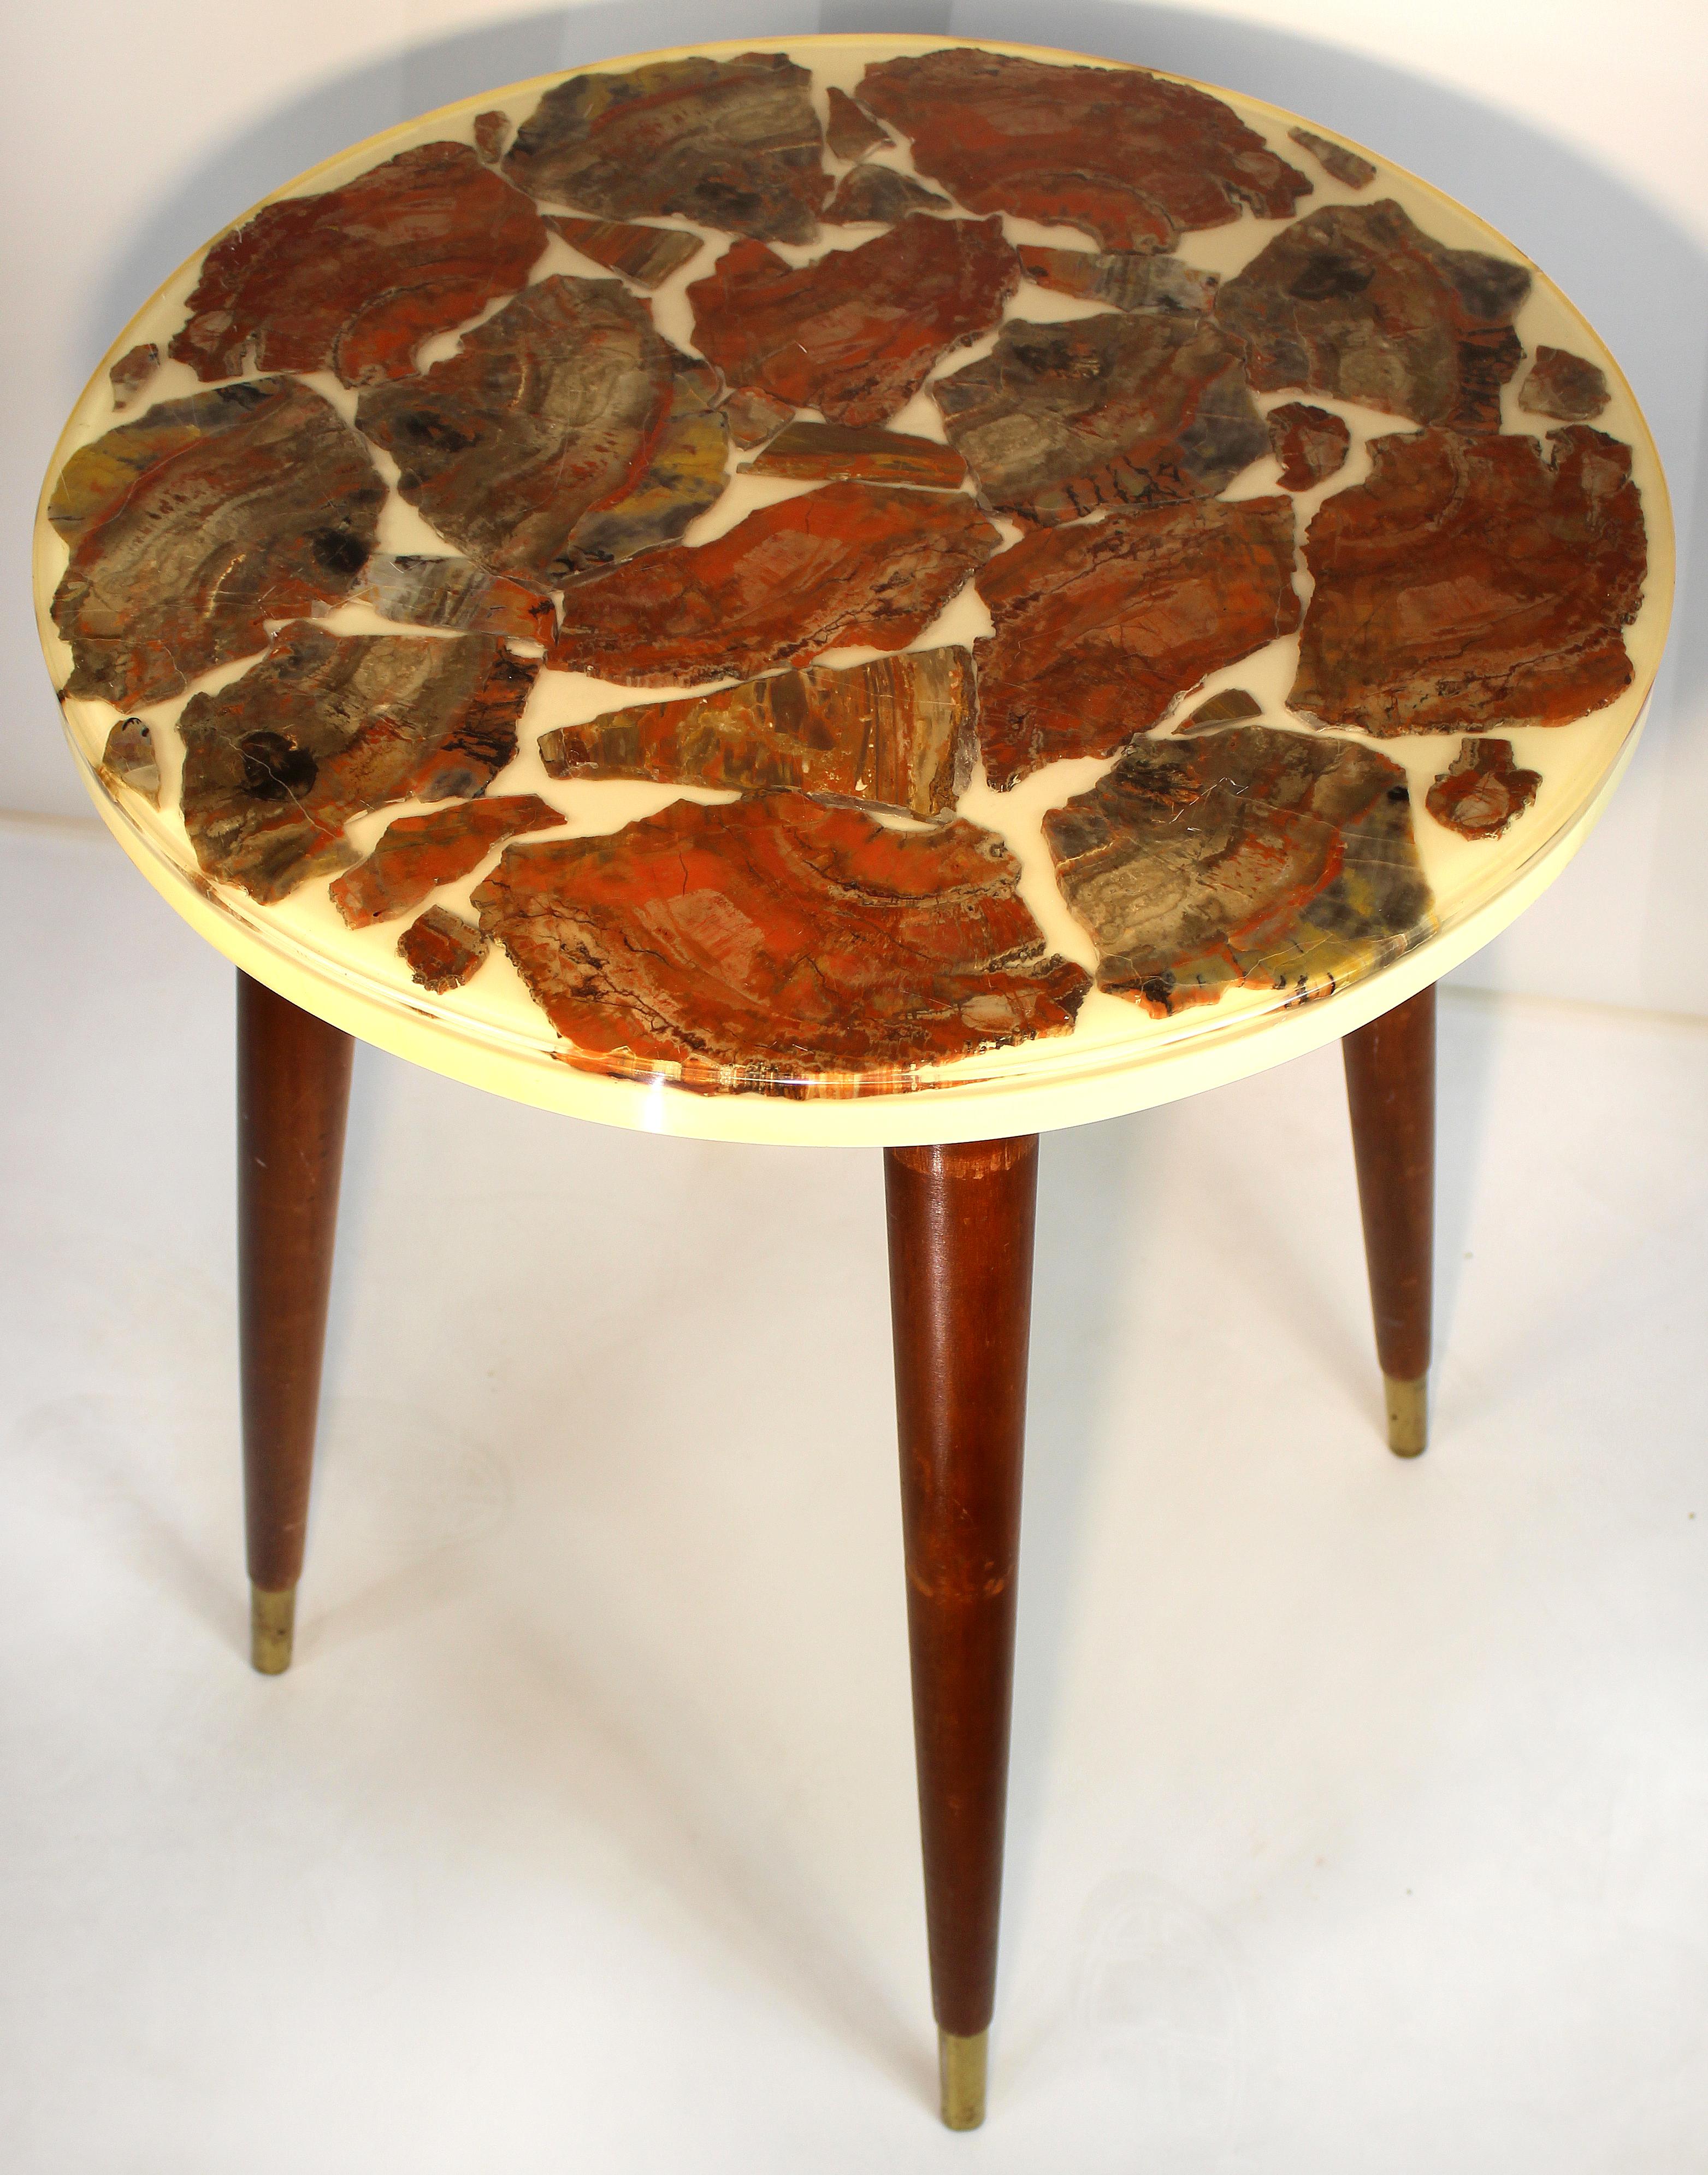 Midcentury Modern Epoxy Resin Petrified Wood Specimen Occasional Table

Offered for sale is a Mid-Century Modern epoxy resin petrified wood specimen occasional table supported by conical tapering legs with brass caps.

 